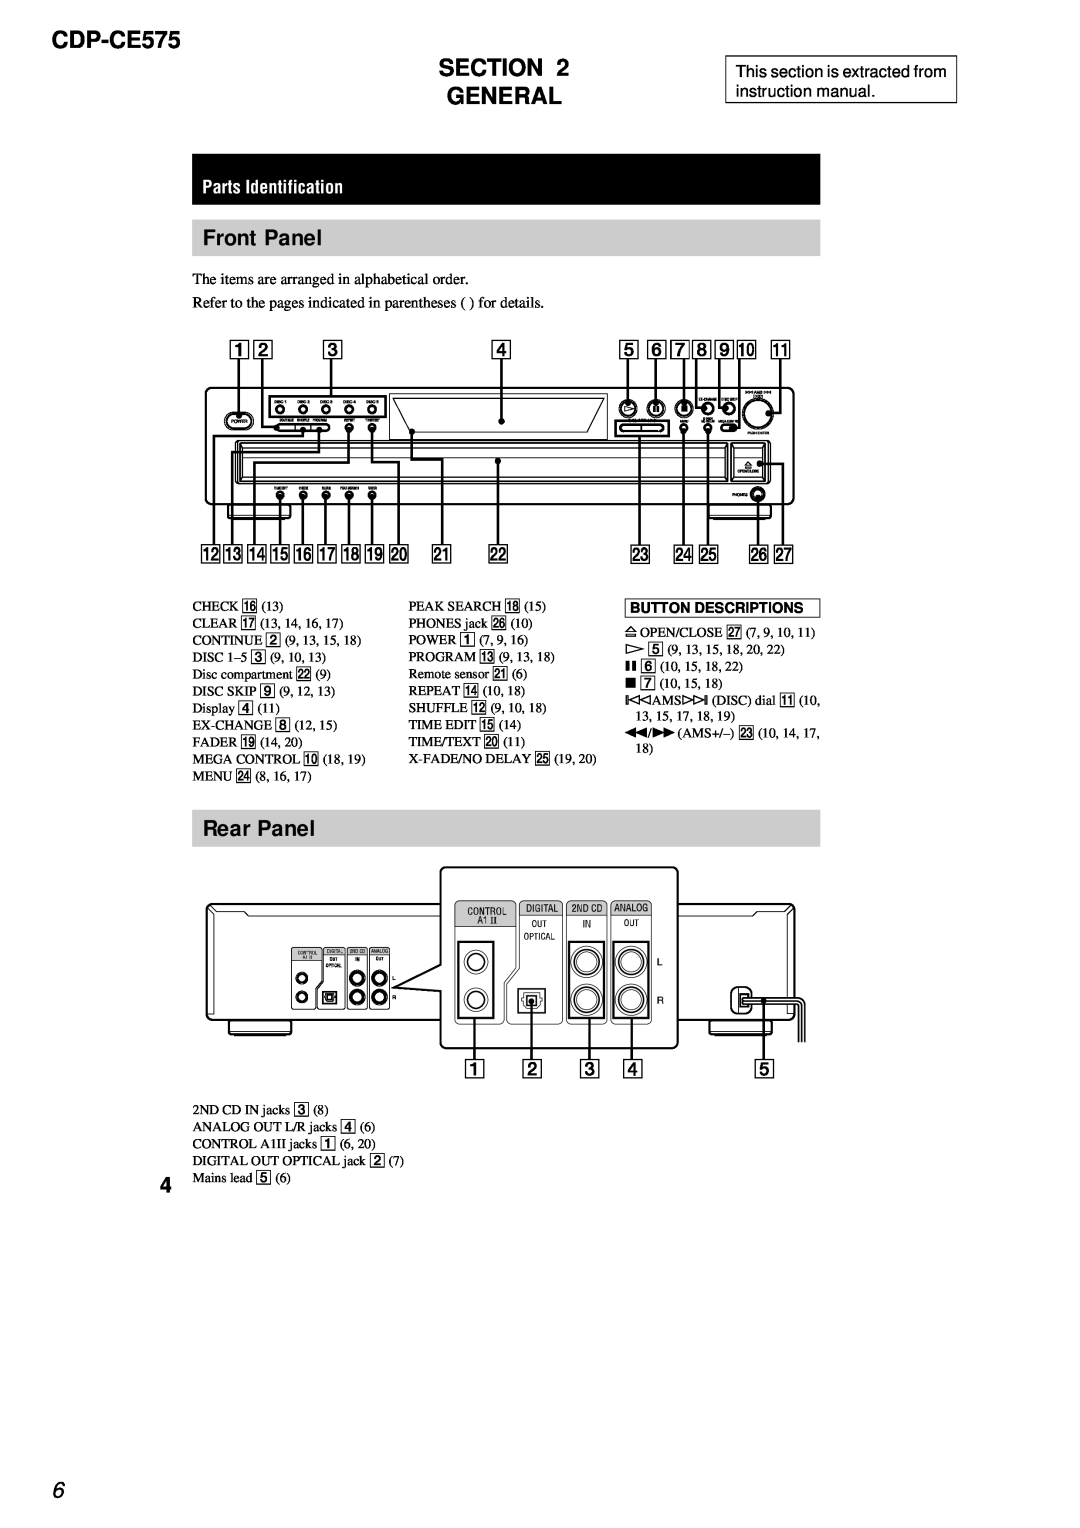 Sony service manual Front Panel, Rear Panel, CDP-CE575 SECTION GENERAL, Parts Identification, Button Descriptions 